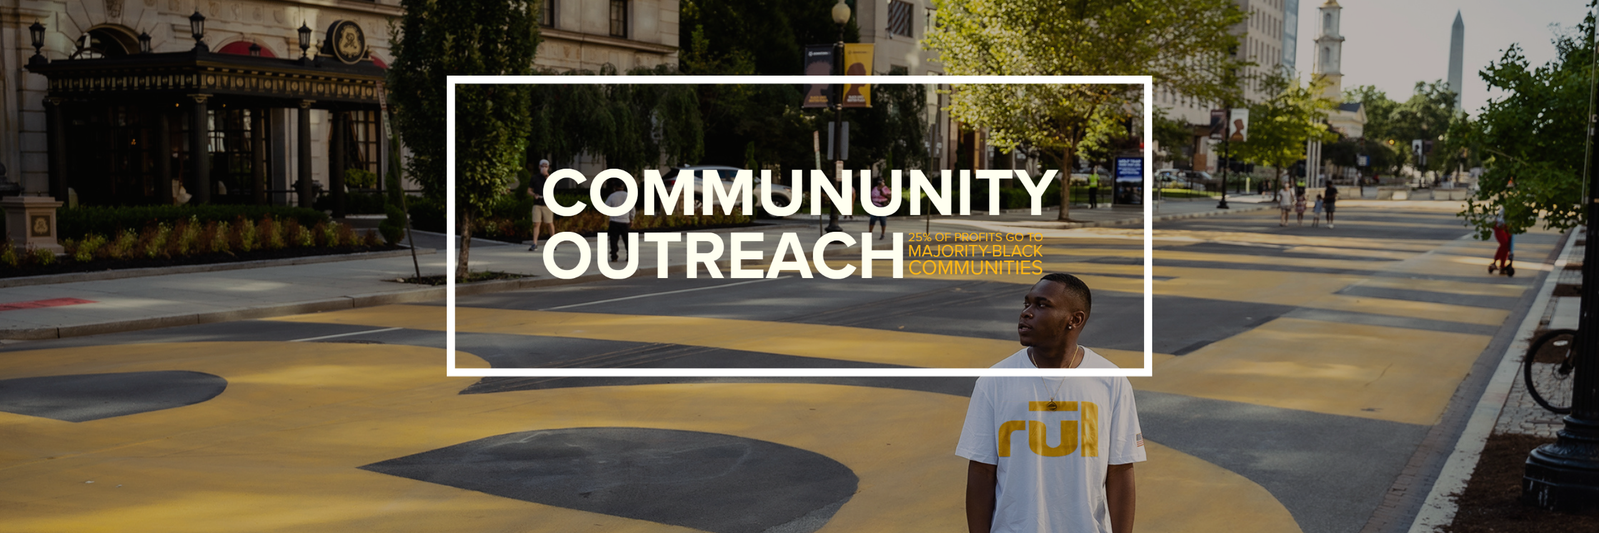 RUL encourages the collaboration of artists to promote city culture and believes in pouring support and infrastructure back into the community to maintain an uplifting, thriving environment.